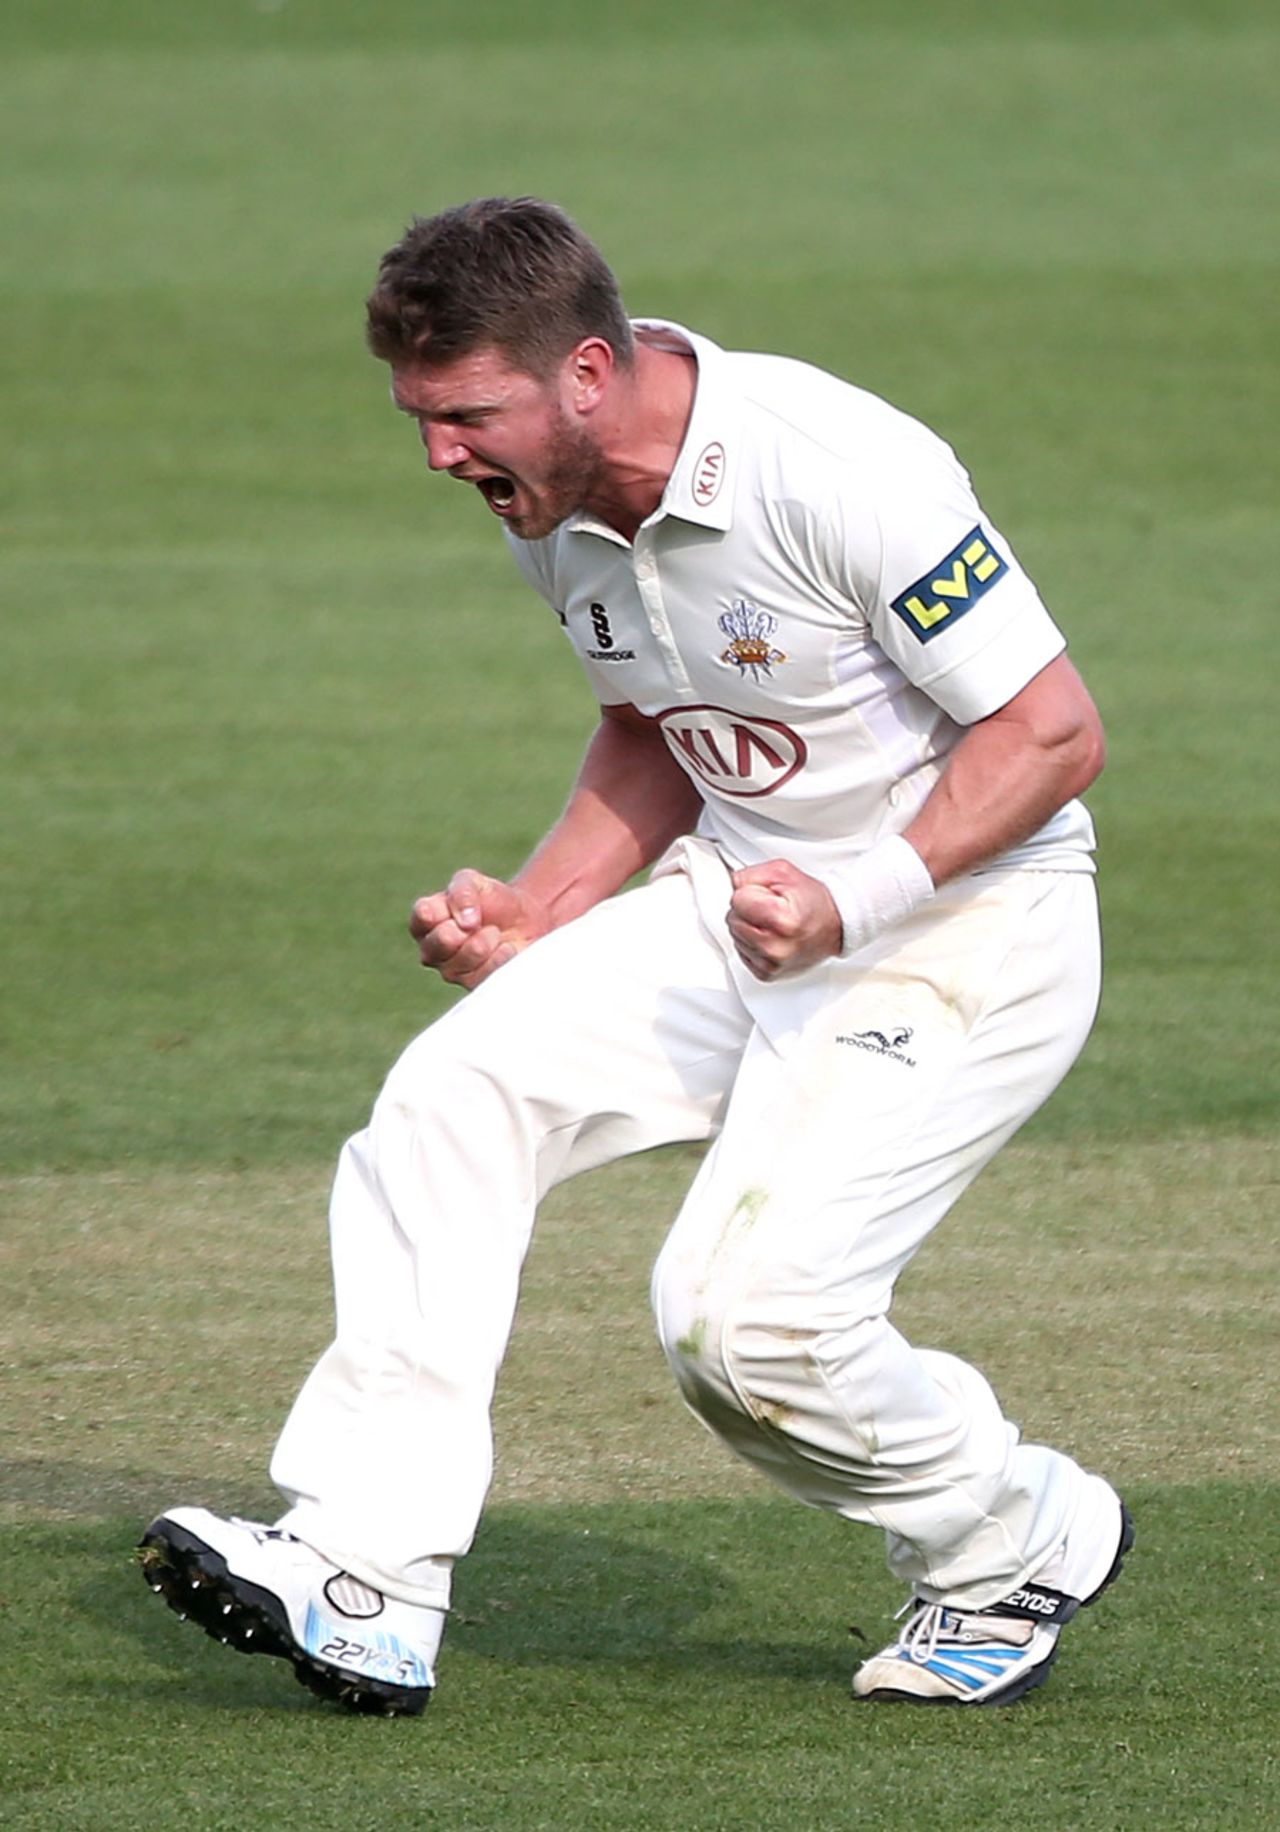 Stuart Meaker enjoyed removing Ben Foakes, Surrey v Essex, County Championship, Division Two, The Oval, April 21, 2014